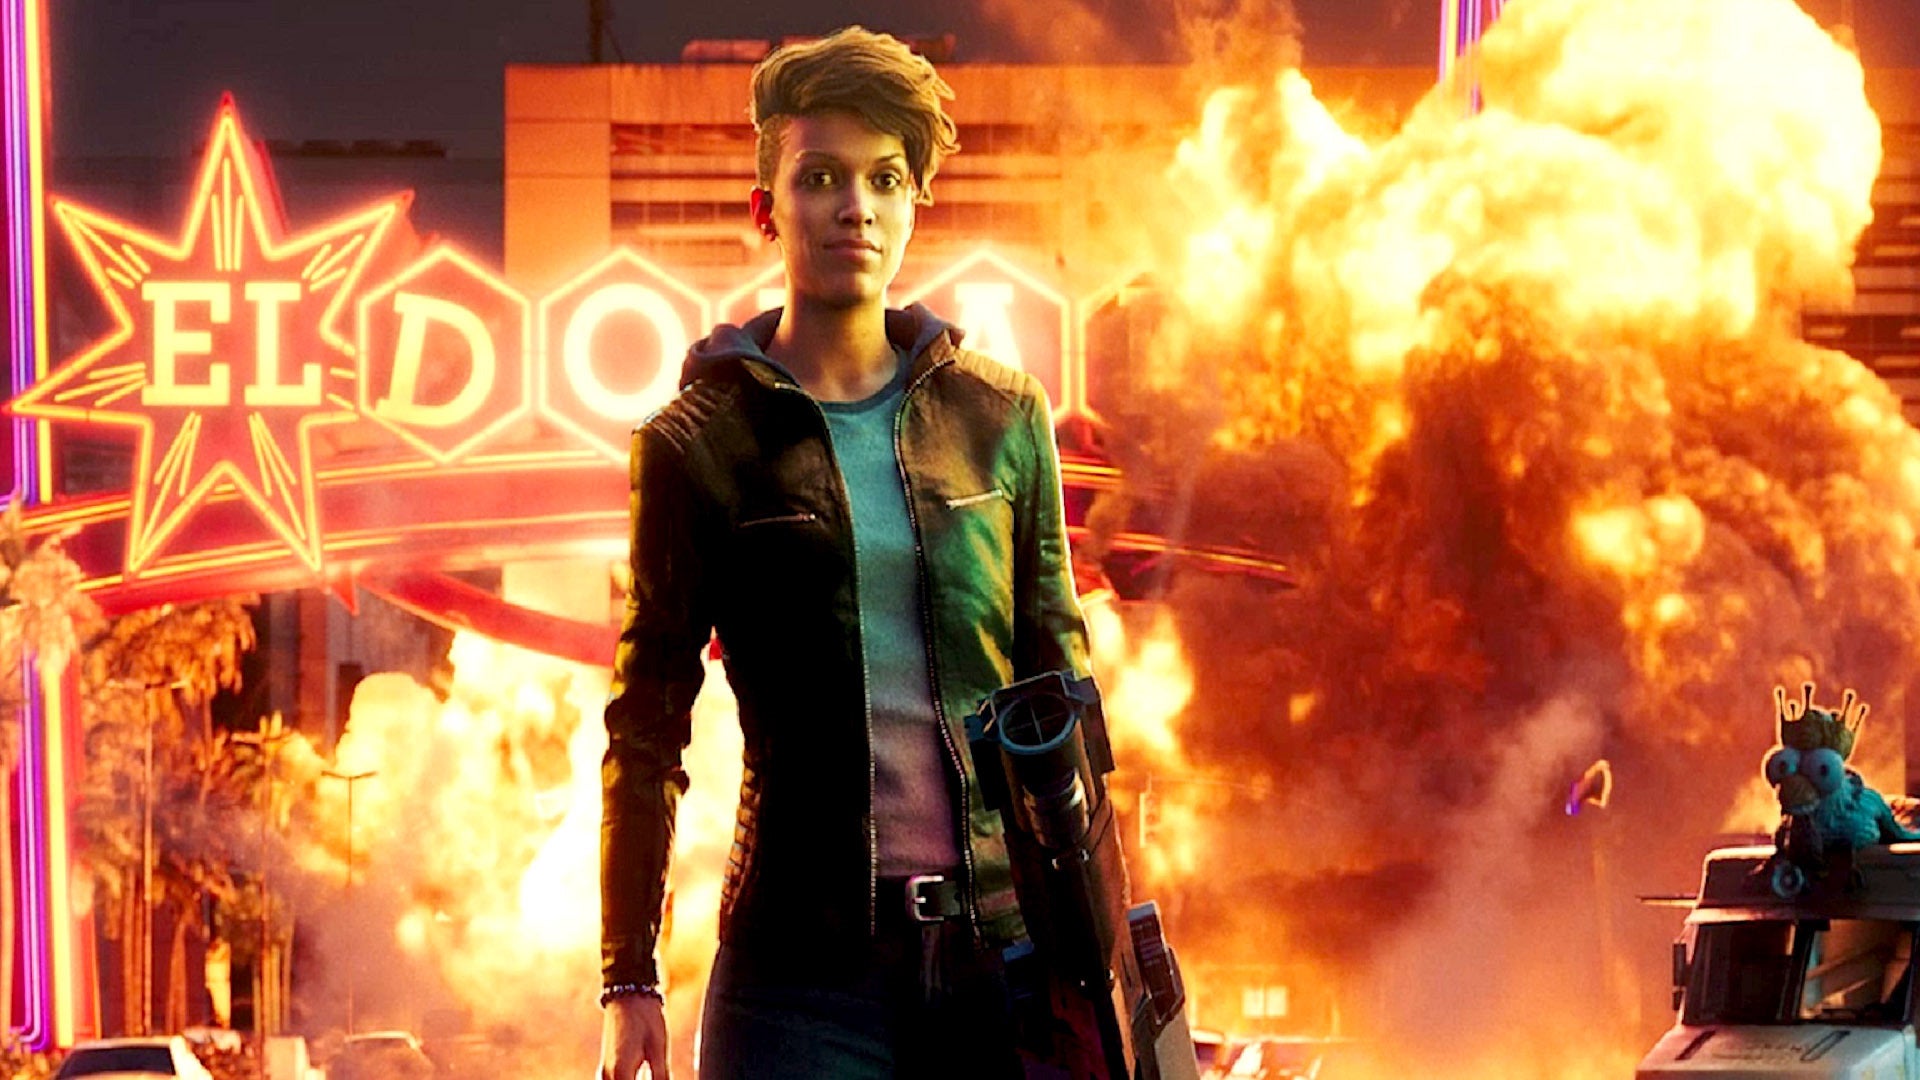 saint's row key art, featuring a character standing in front of an explosion